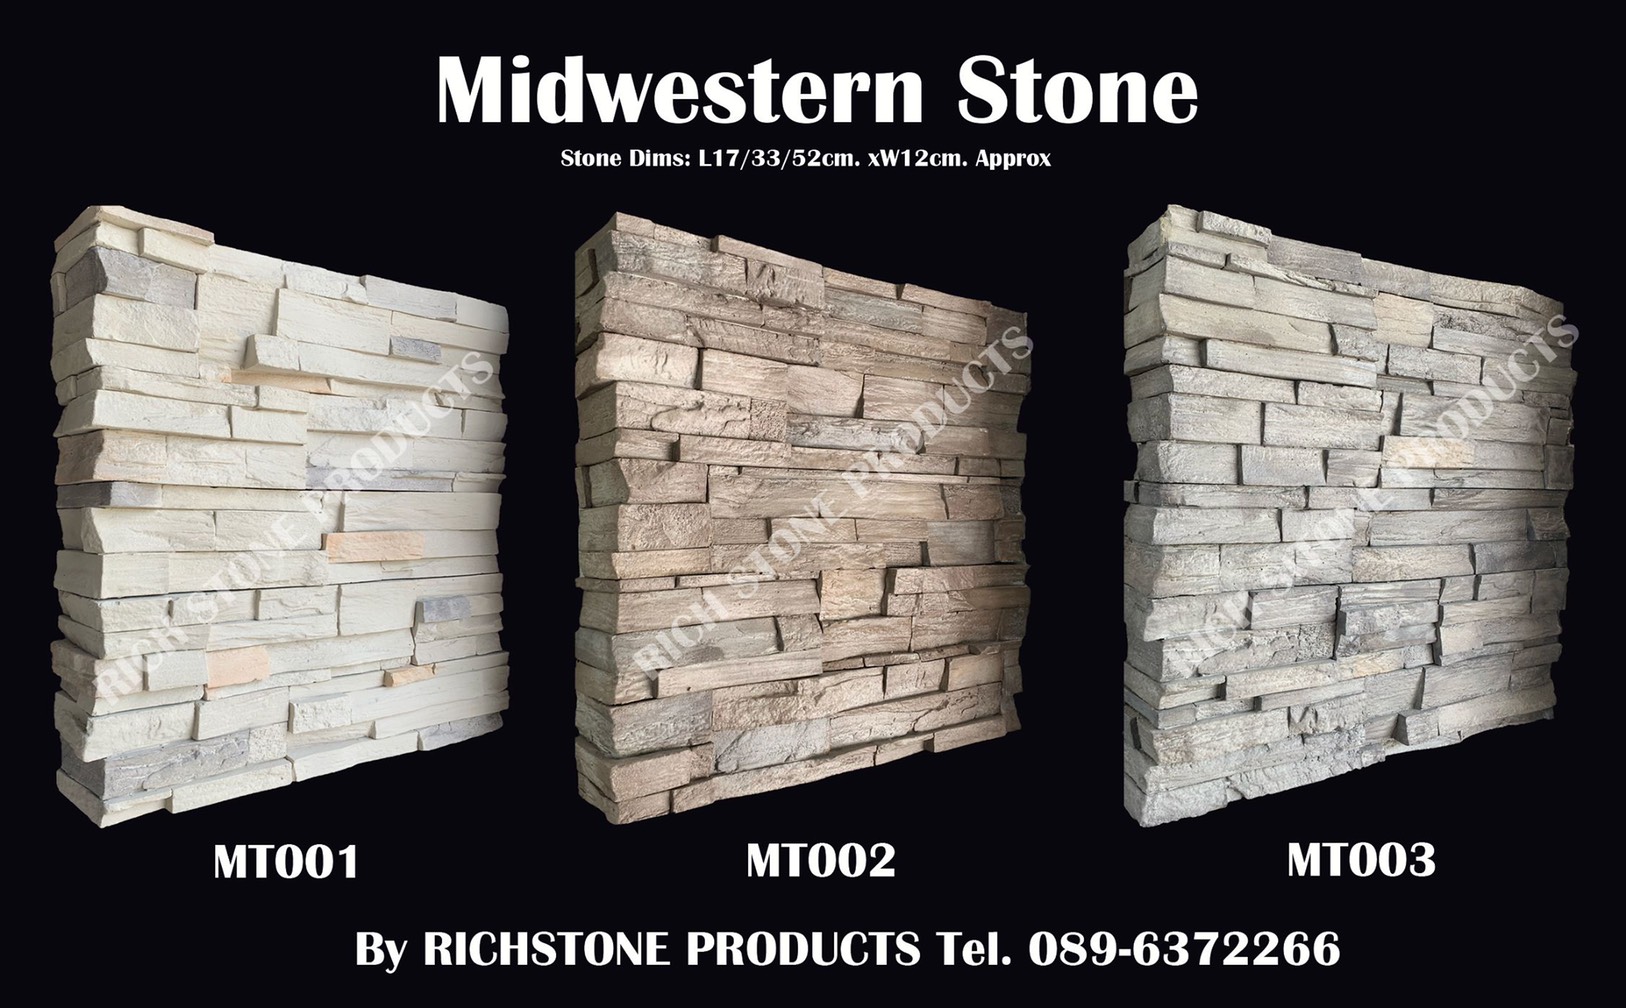 Midwestern Stone